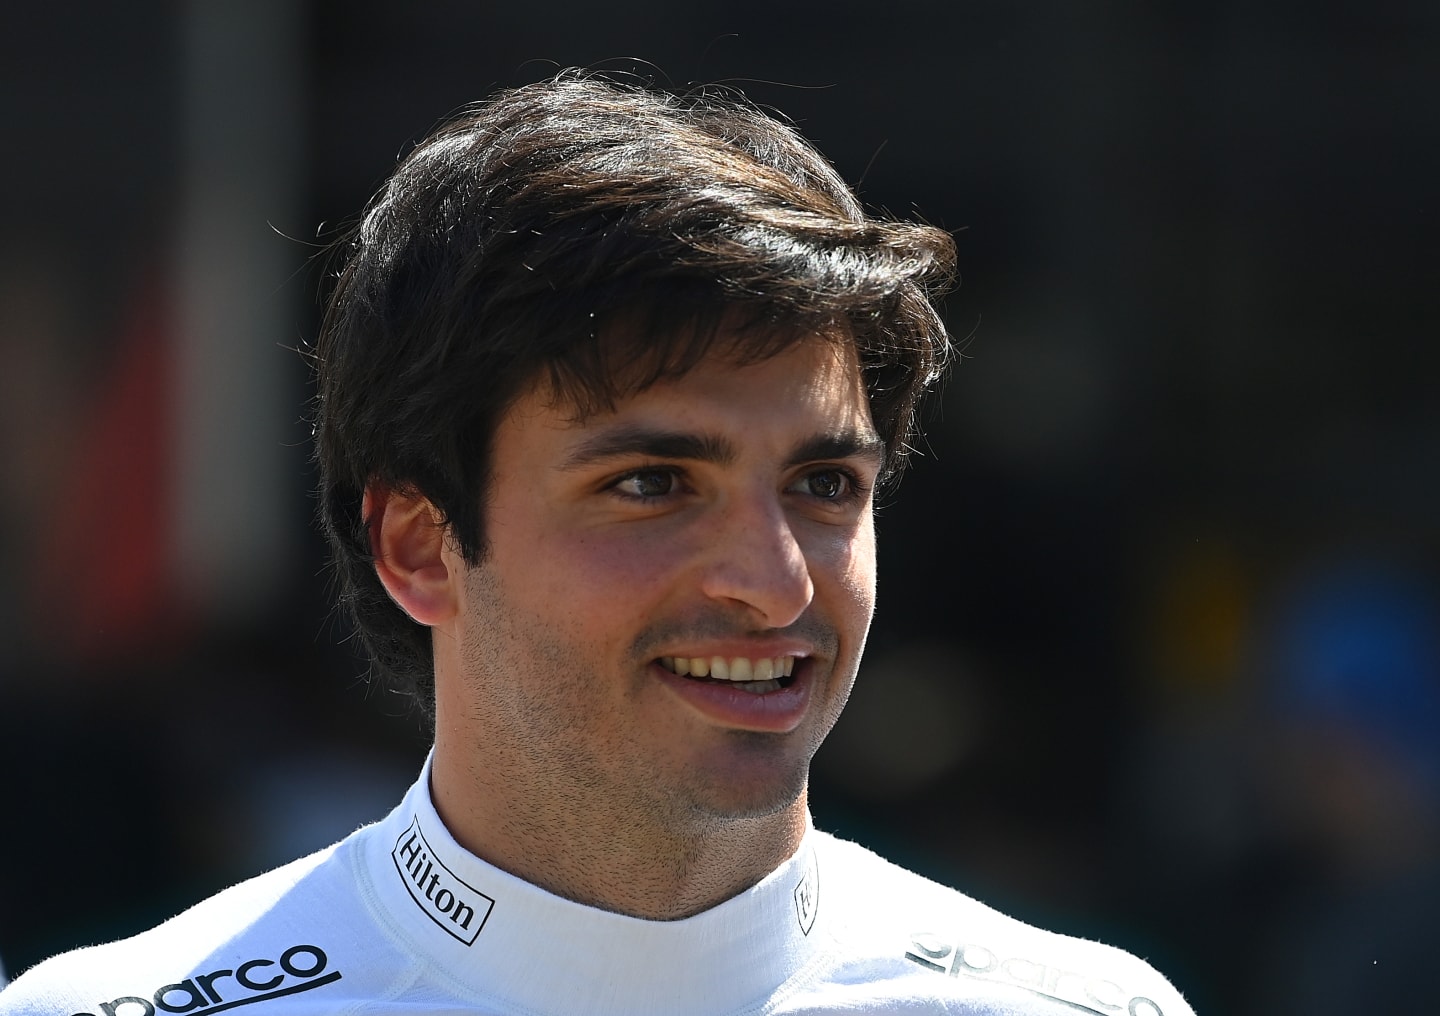 MELBOURNE, AUSTRALIA - MARCH 12: Carlos Sainz of Spain and McLaren F1 looks on in the Paddock